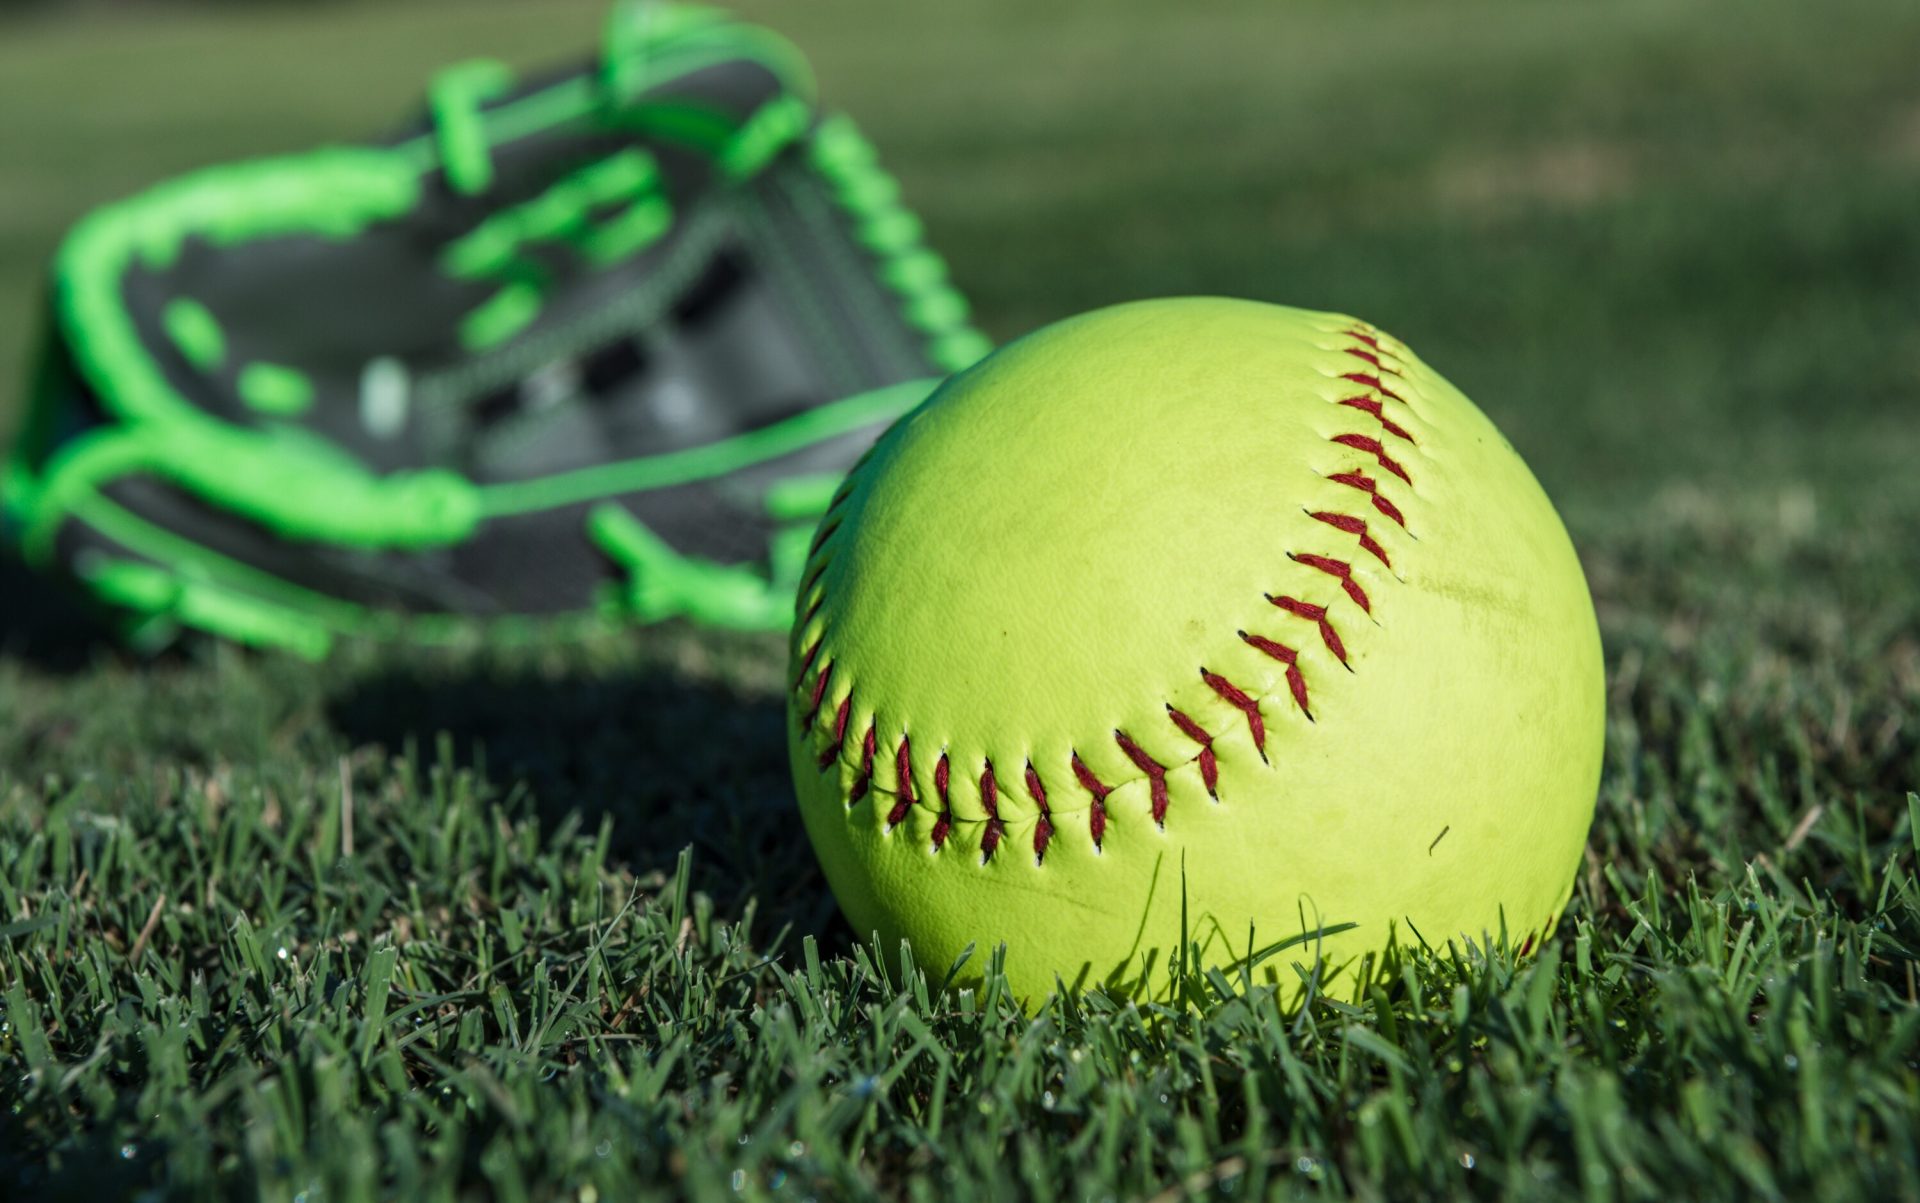 How to be a good role model for your child in softball